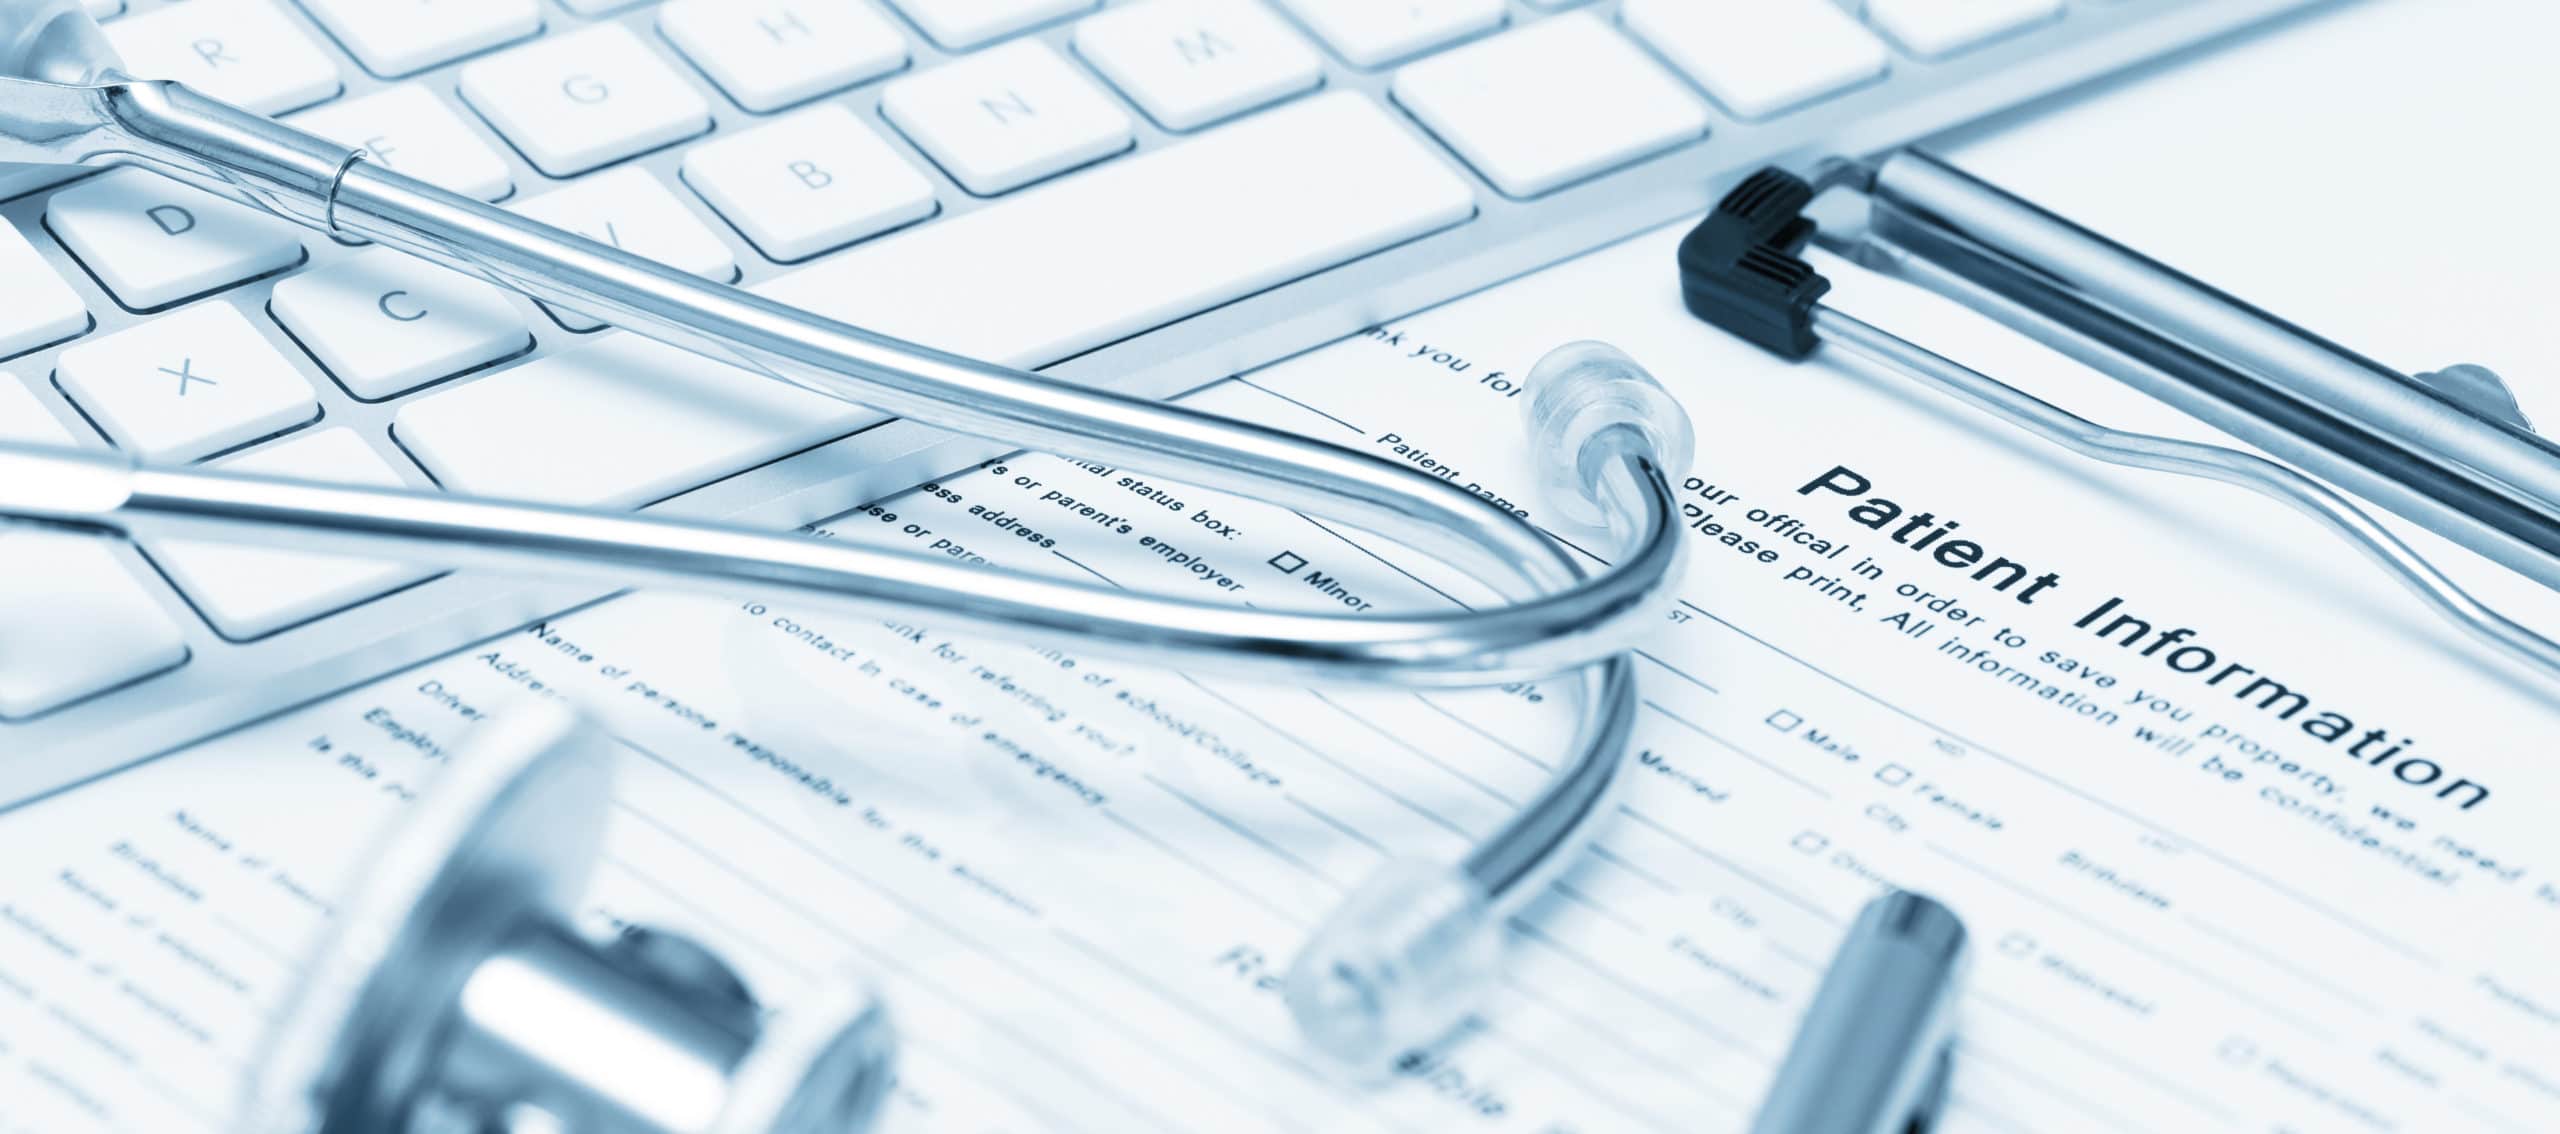 6 Things to Know About HIPAA in the Digital World